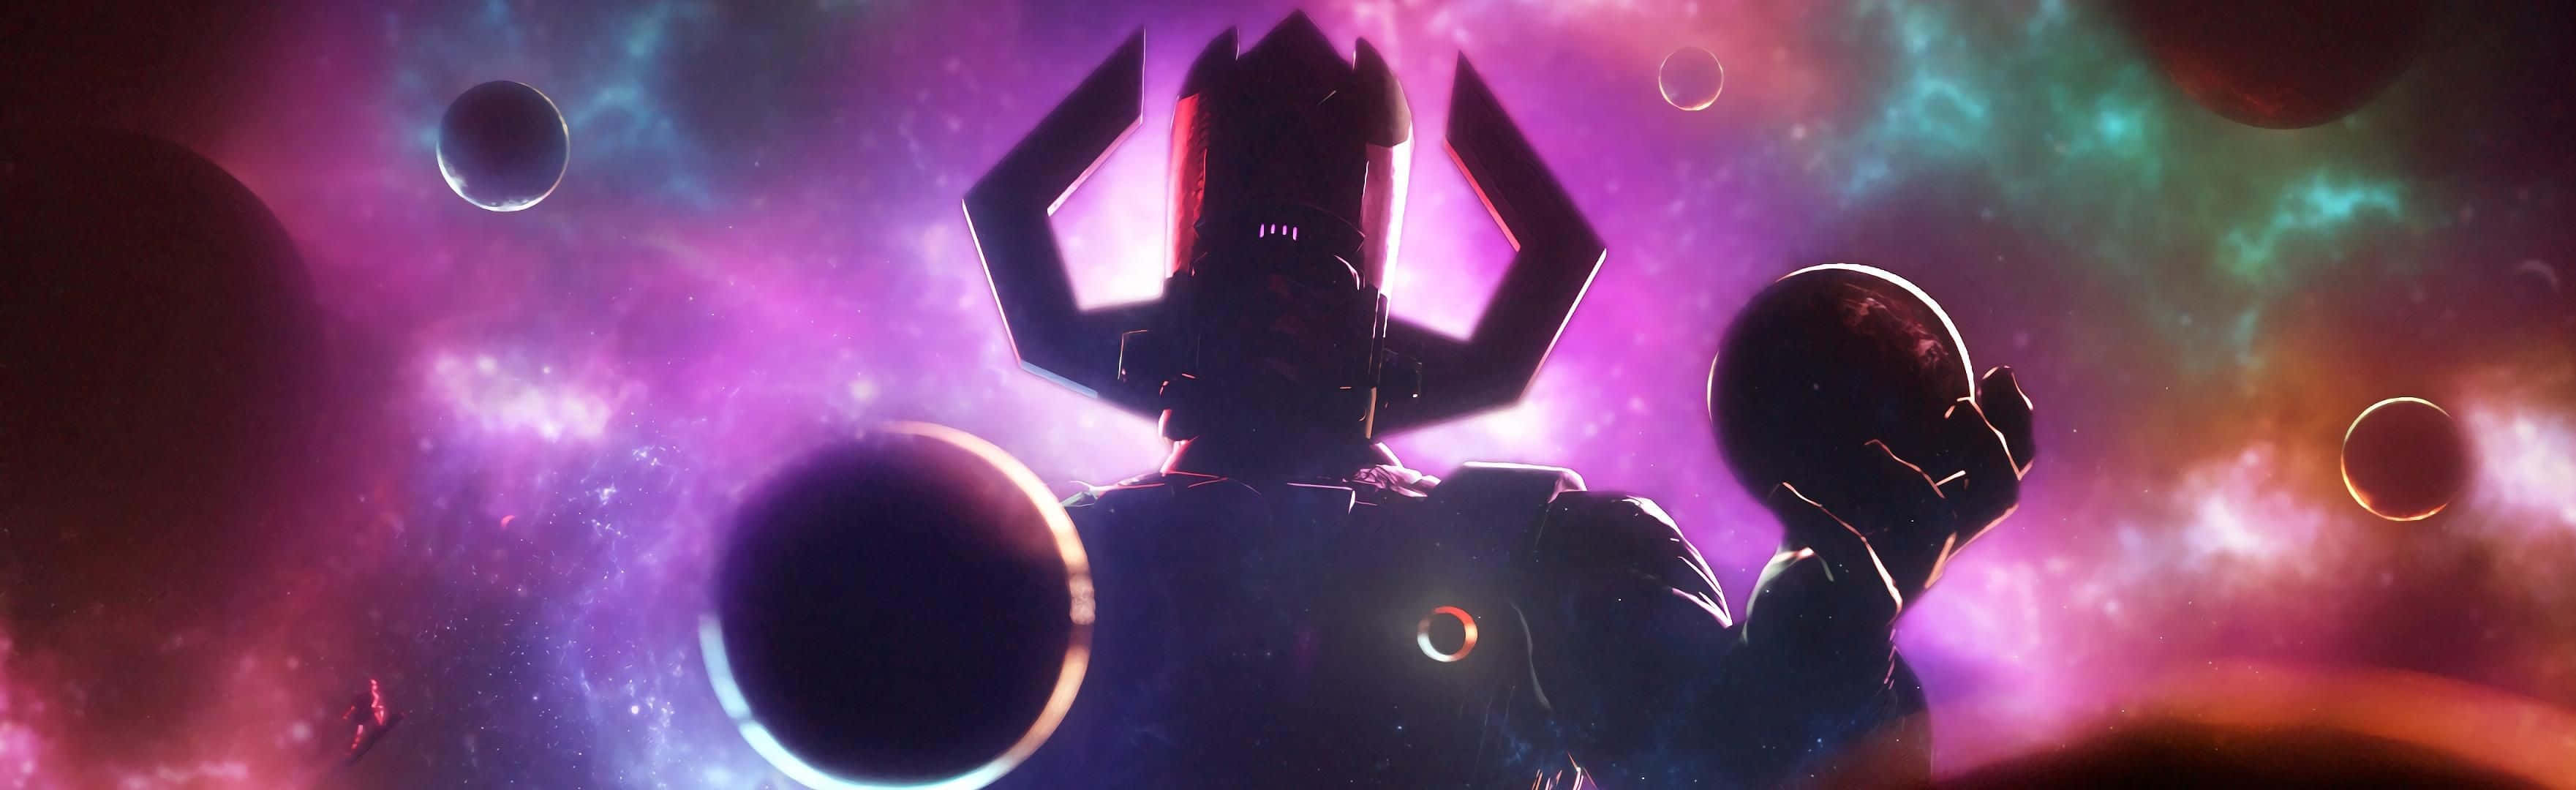 Galactus, the Devourer of Worlds, stands tall in a cosmic landscape Wallpaper